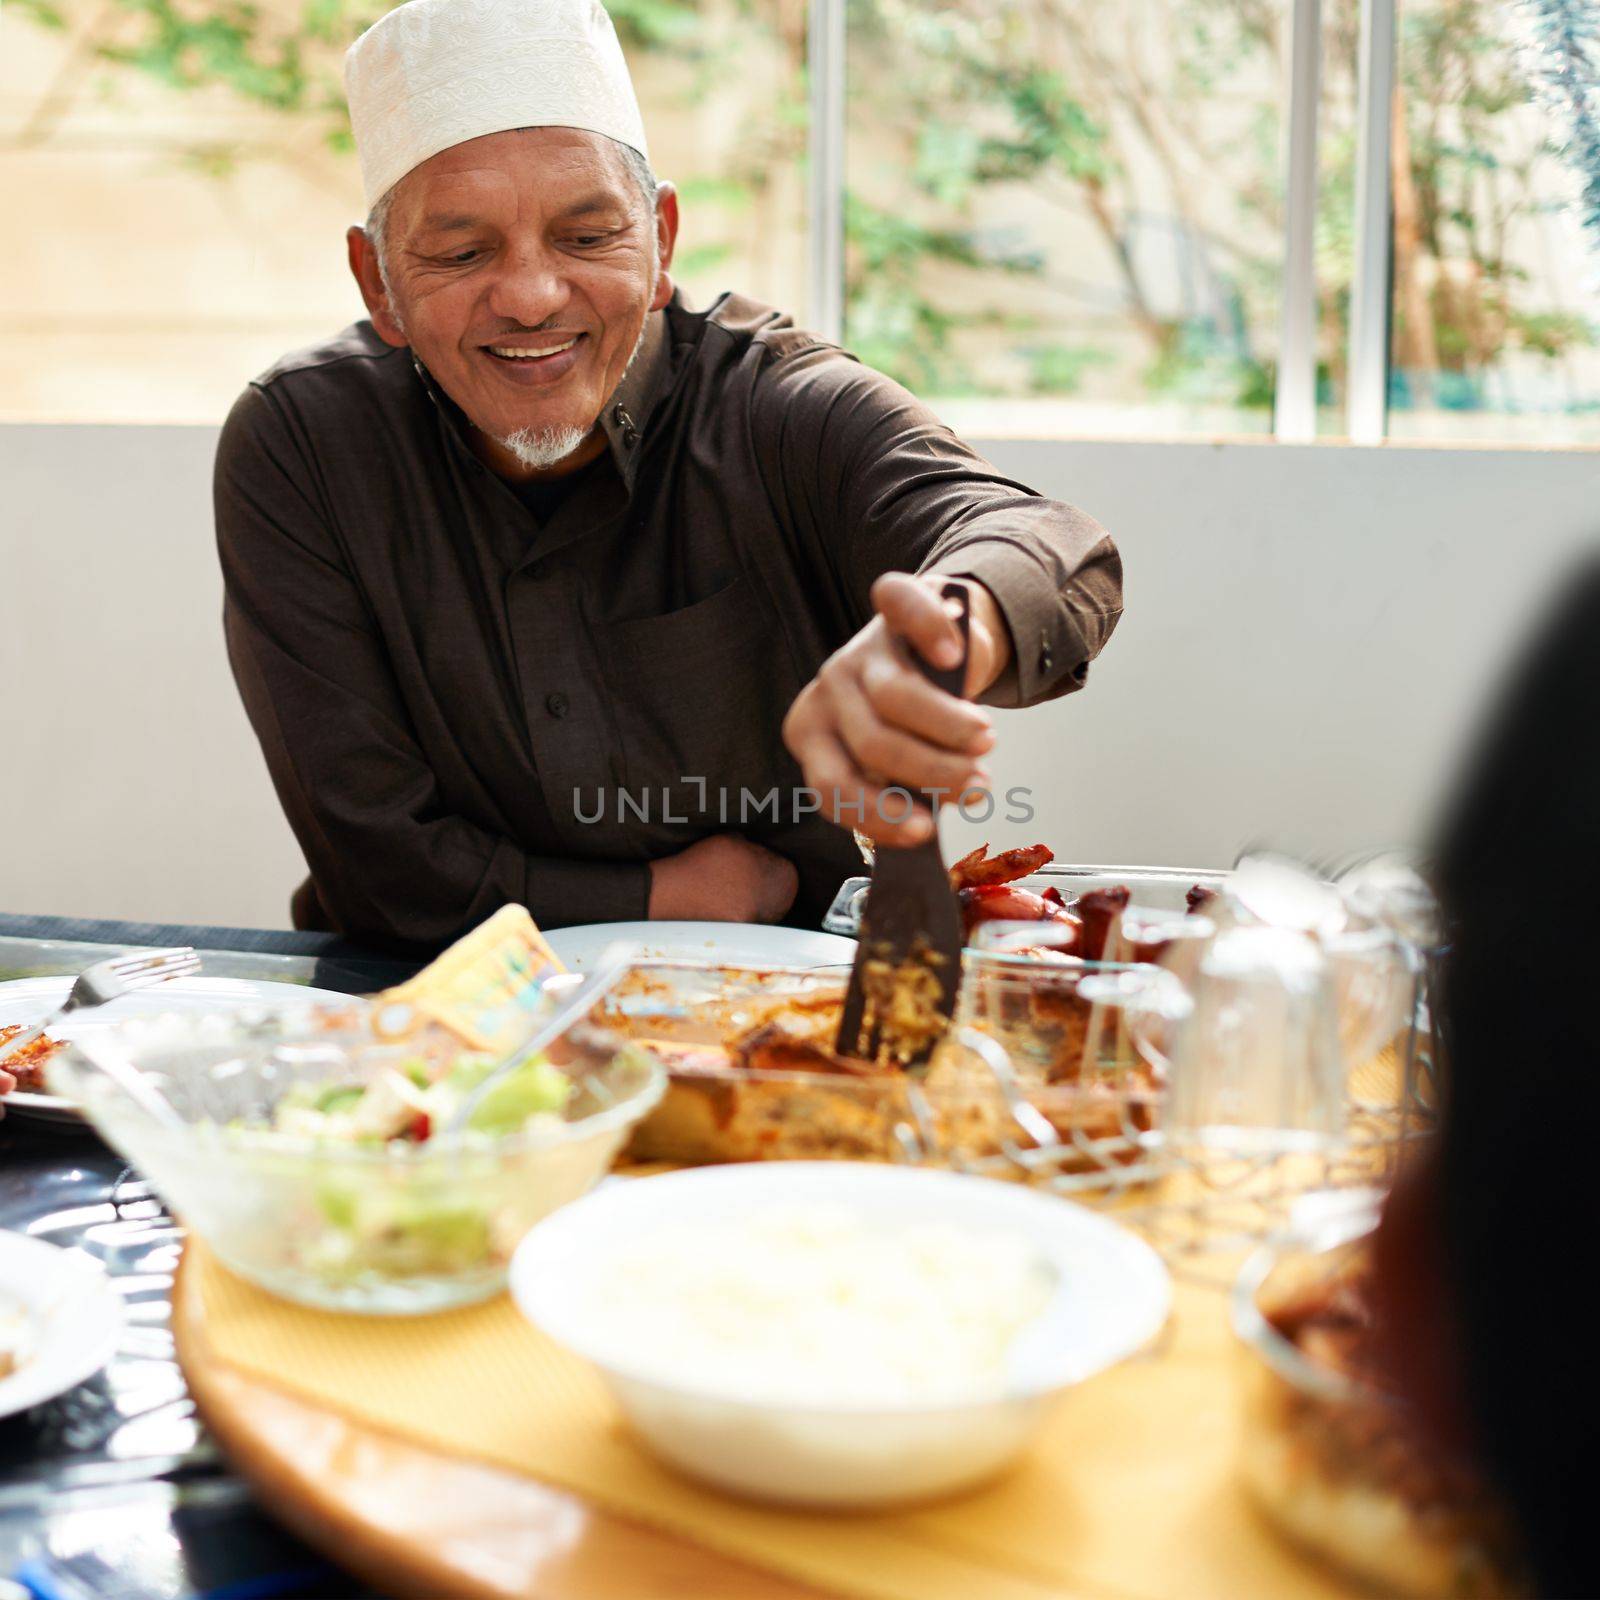 Family feast. a happy muslim man enjoying a meal with his family